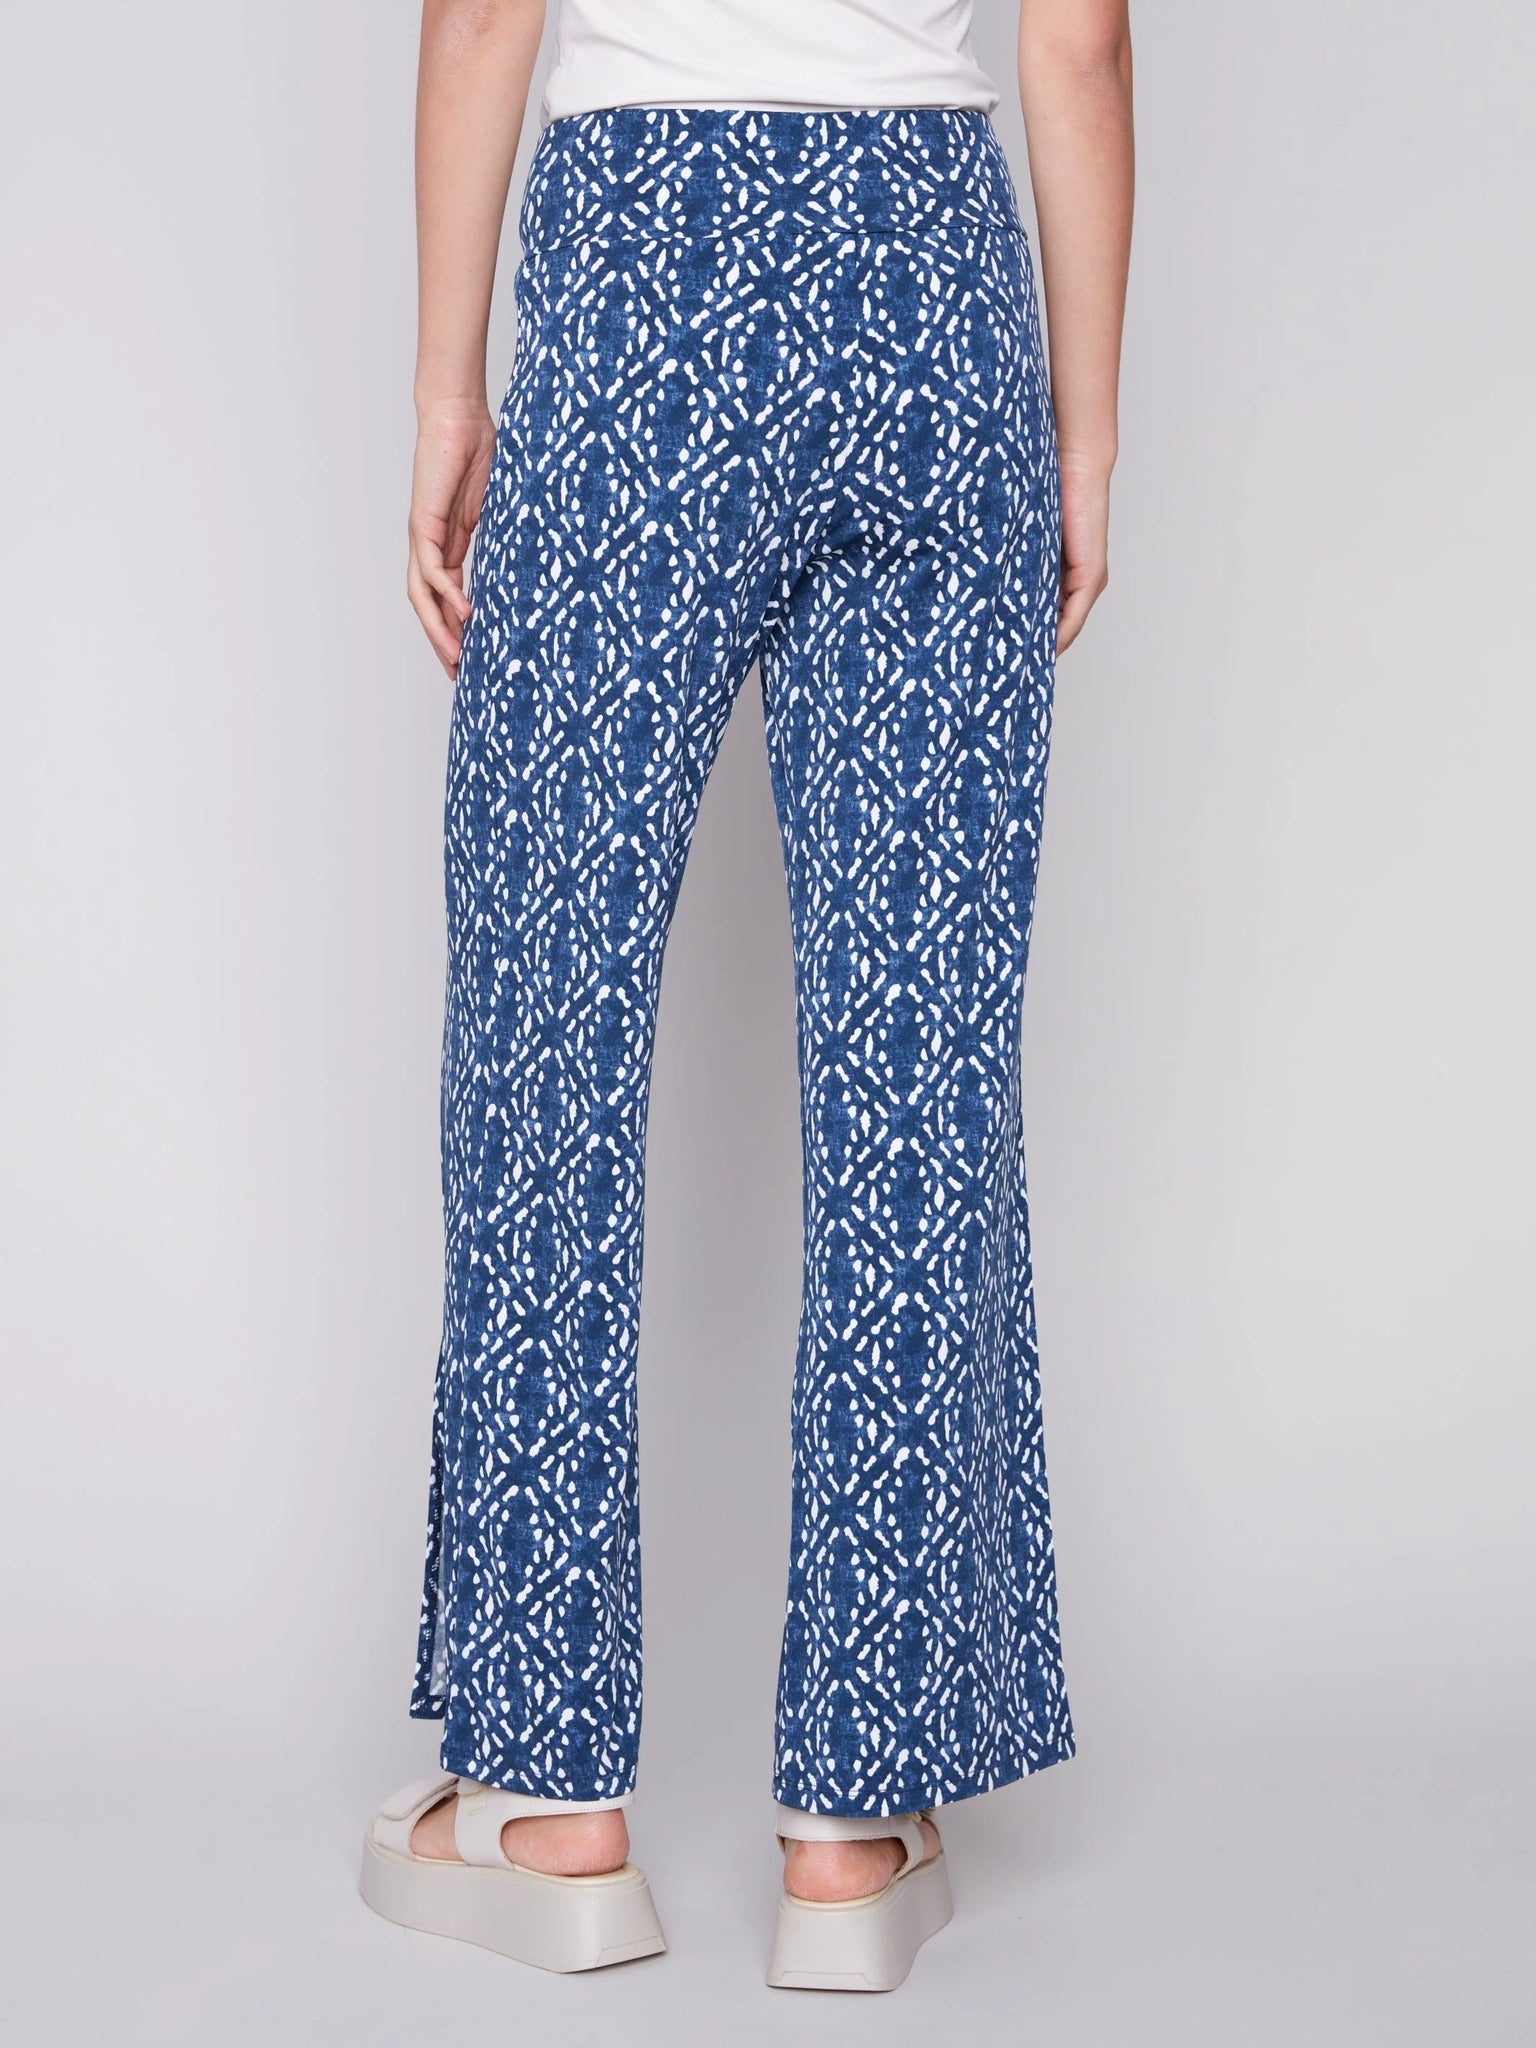 Printed Wide Leg Pants with Front Slits